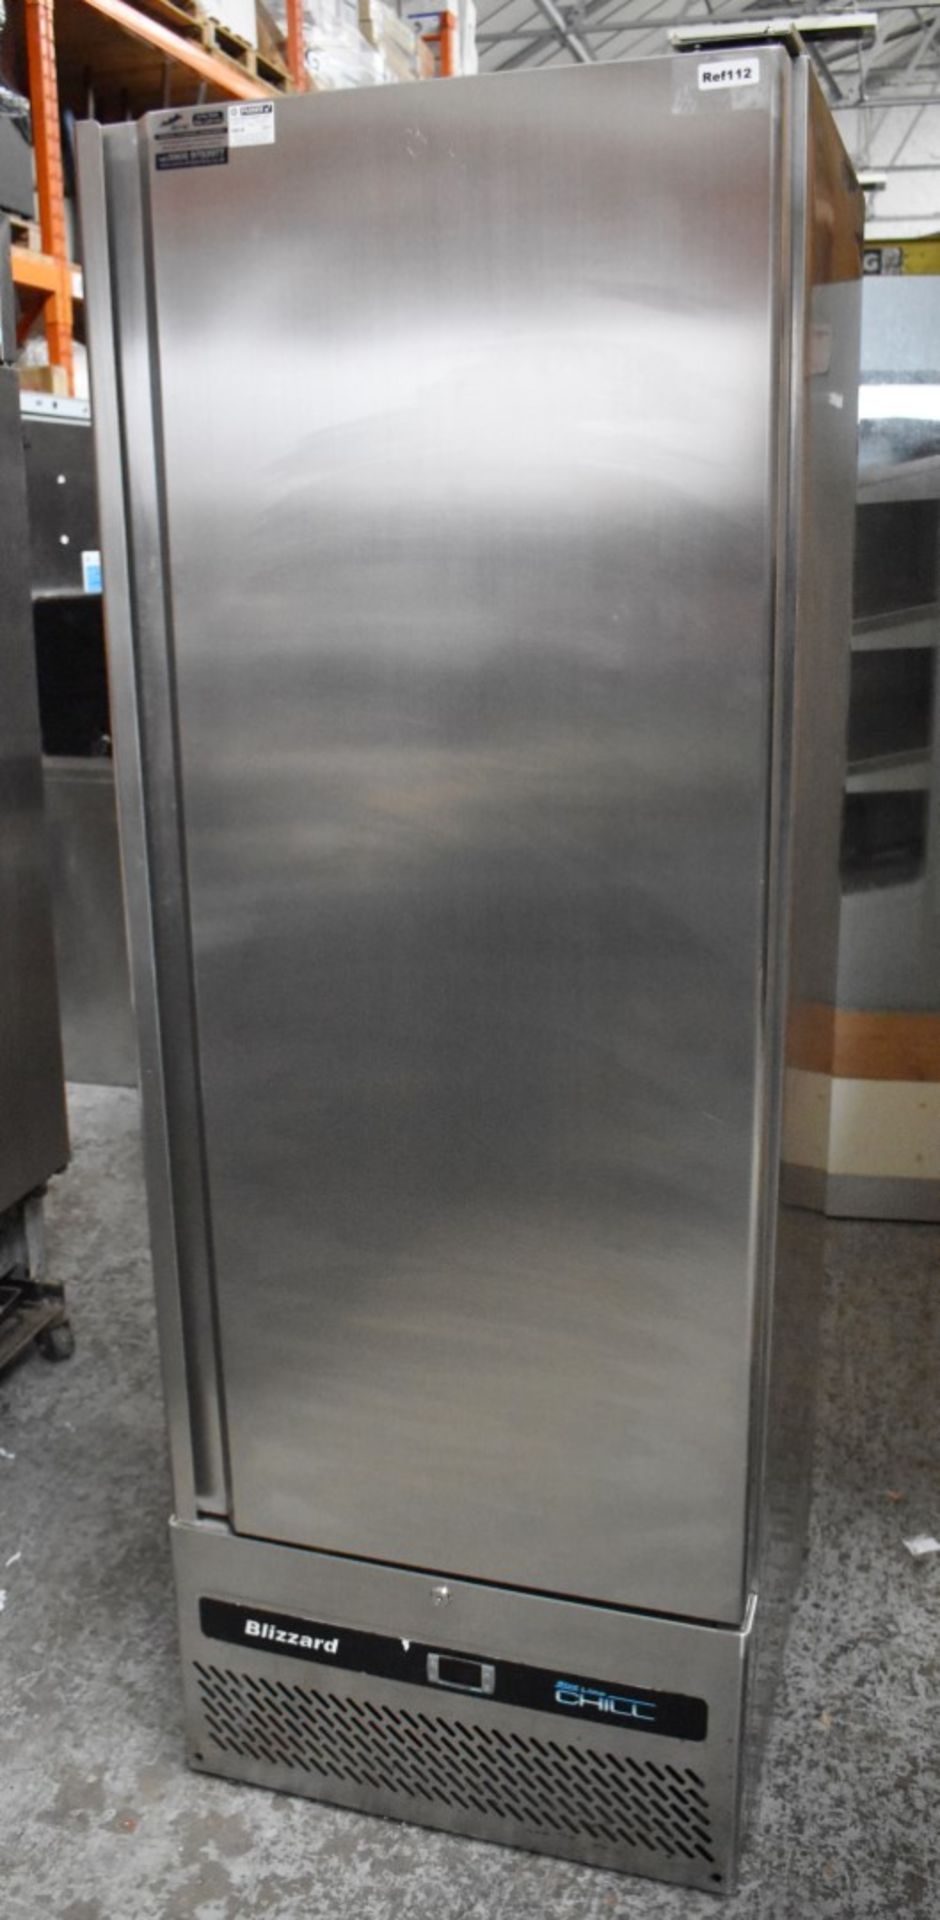 1 x Blizzard BCC400 Upright Commercial Fridge - Stainless Steel Finish - 230v - H200 x W68 x D71 cms - Image 3 of 7